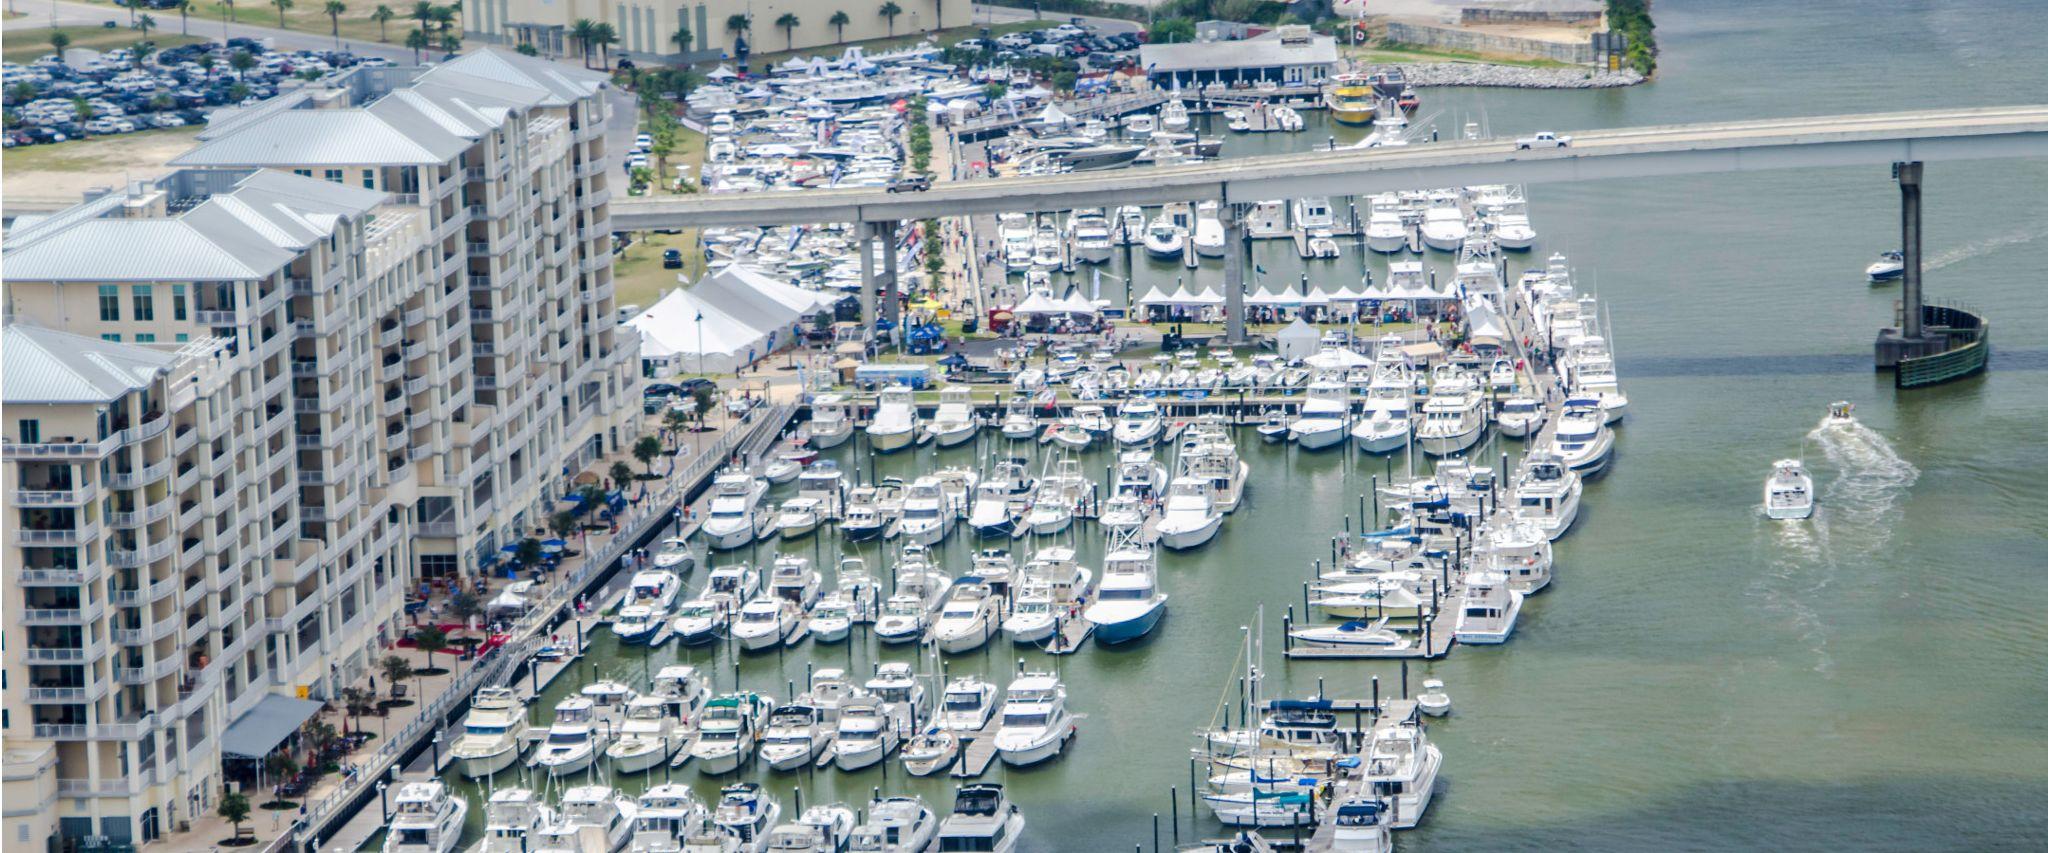 the wharf yacht and boat show